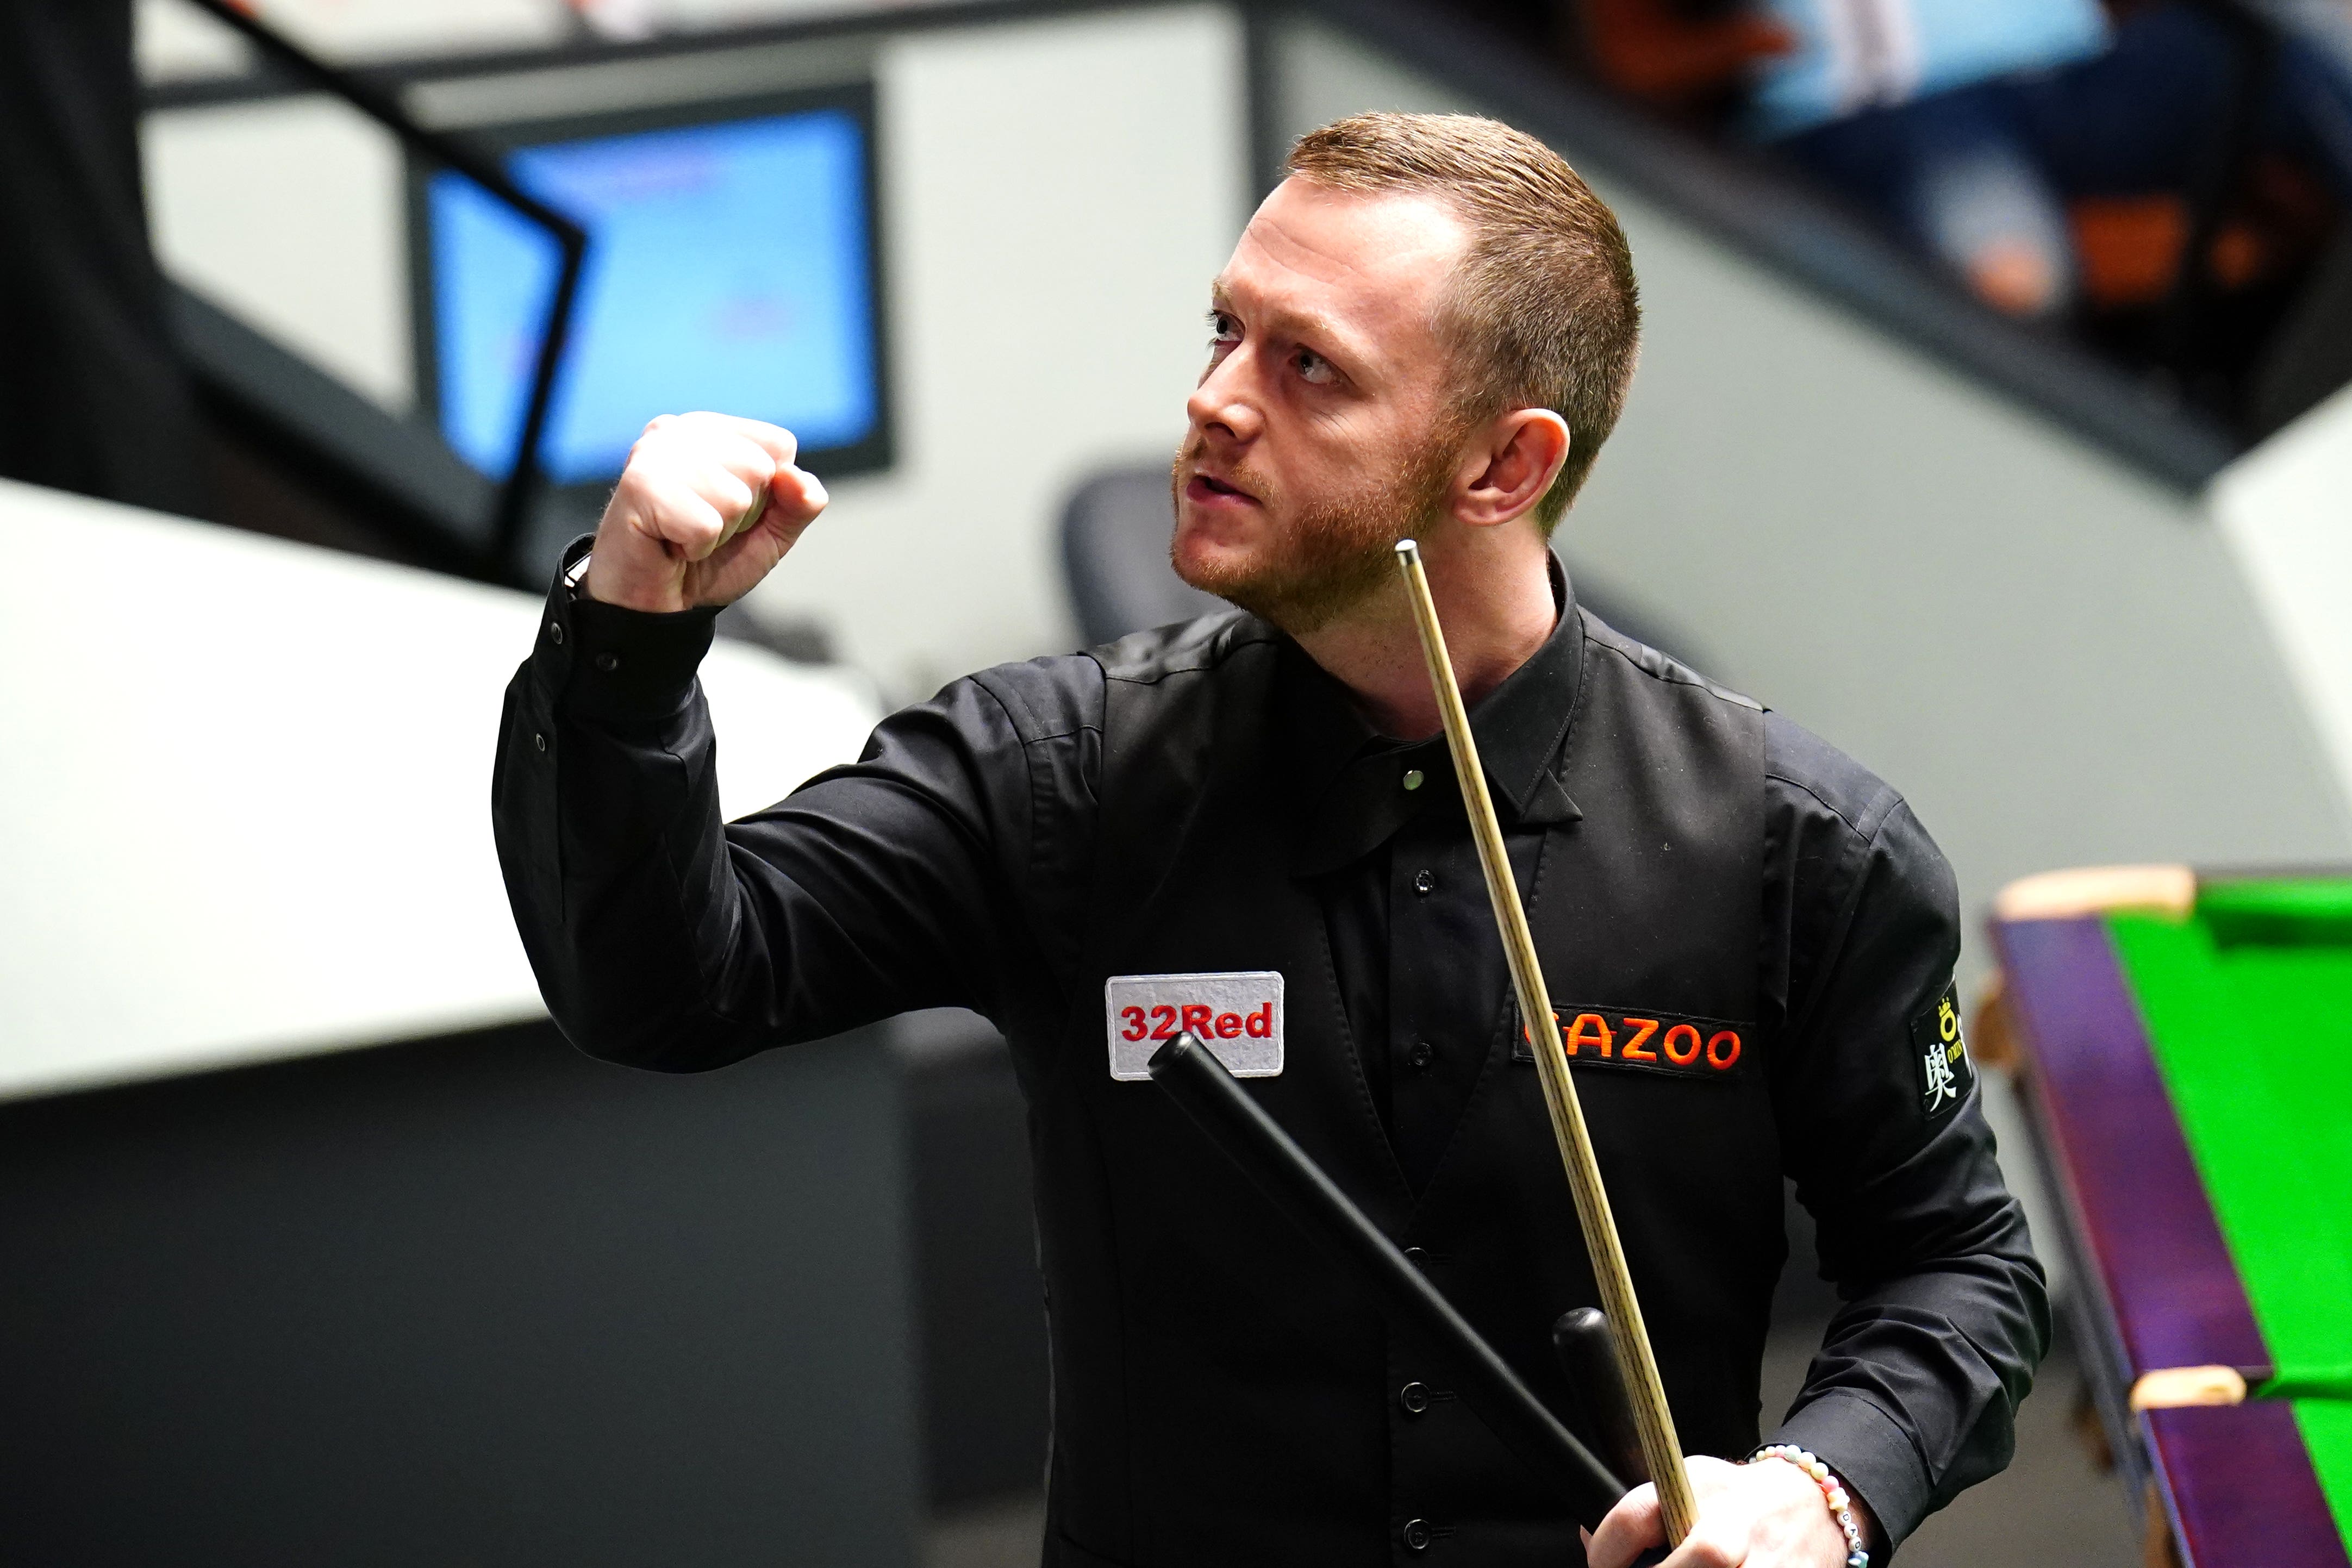 Mark Allen reaches last four at The Crucible with hard-fought win over Jak Jones The Independent